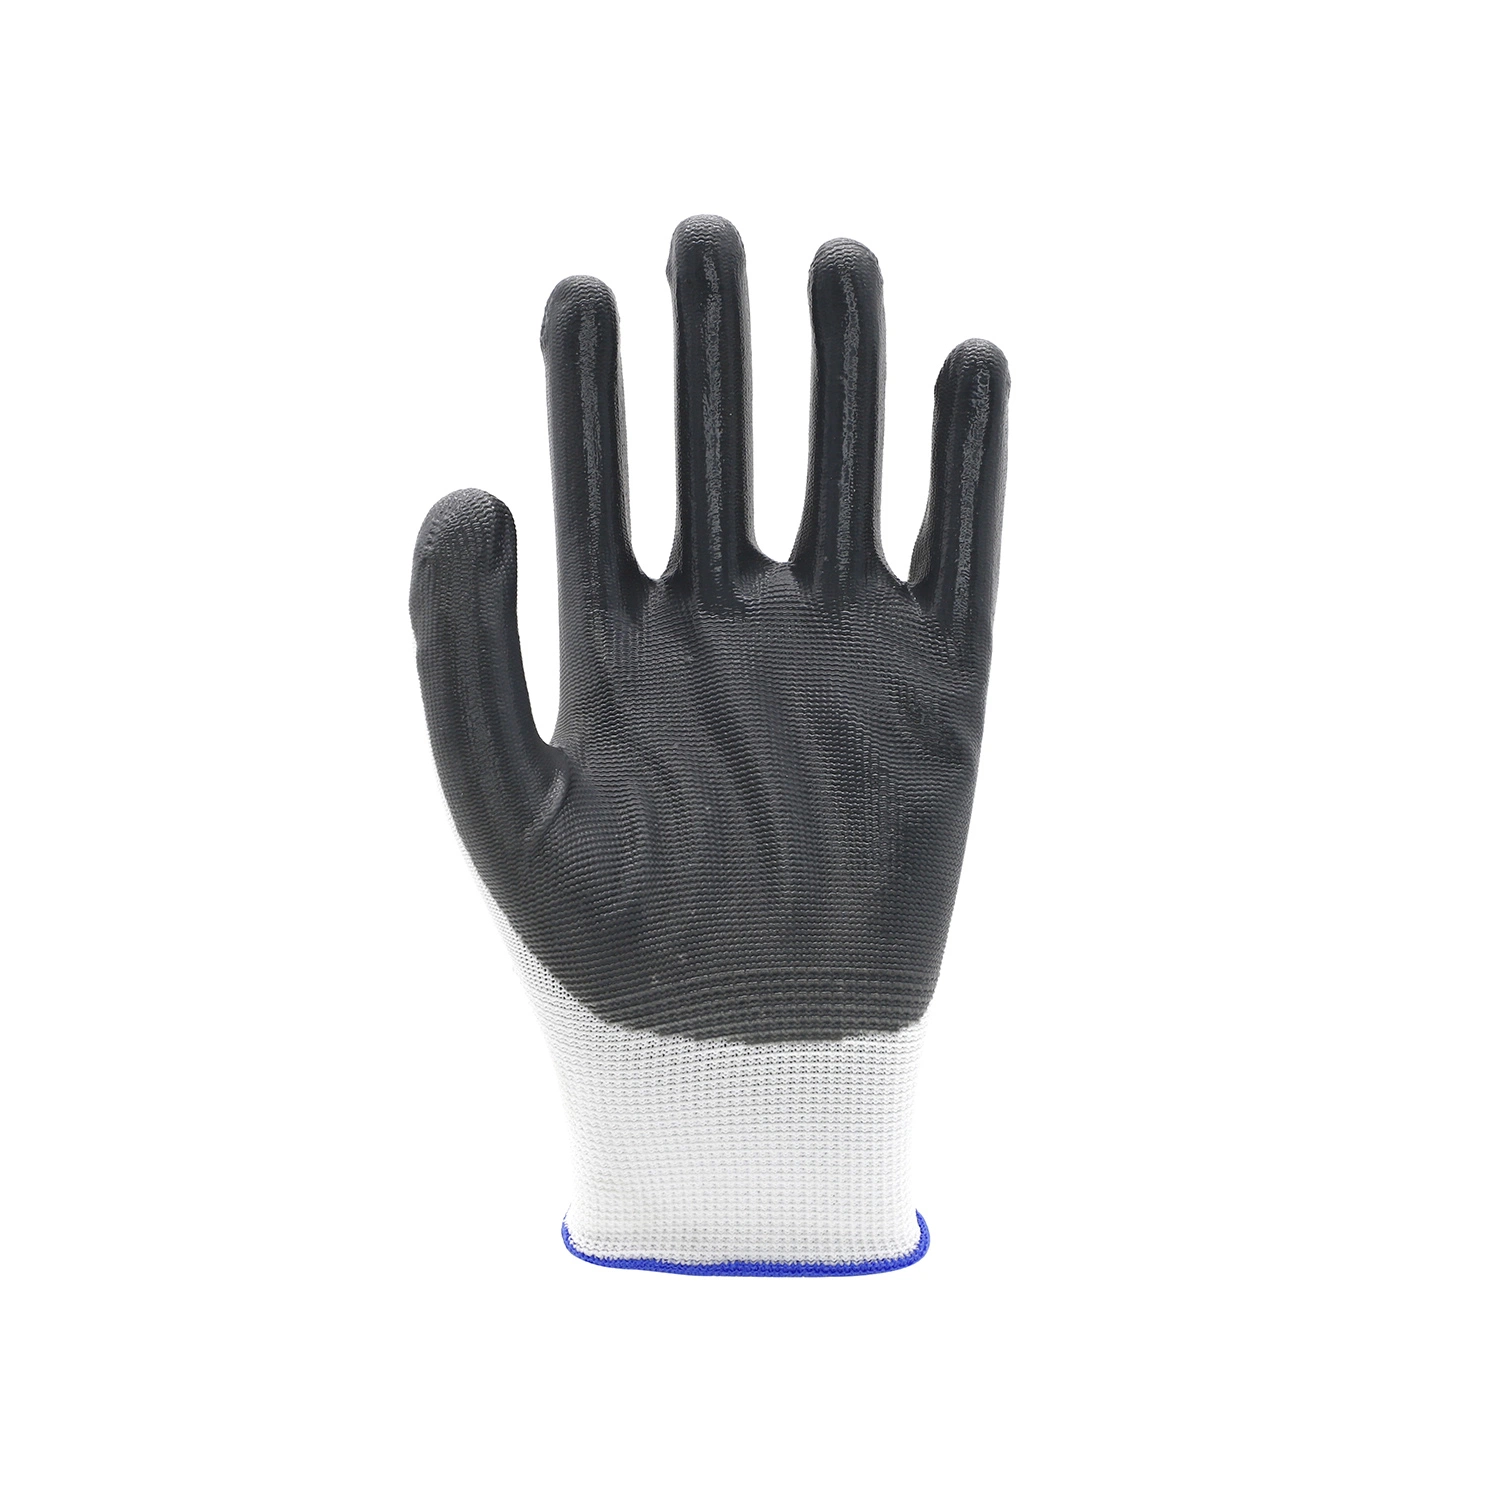 PVC Cotton Nitrile Rubber Gloves Labor Protective Safety Working Gloves